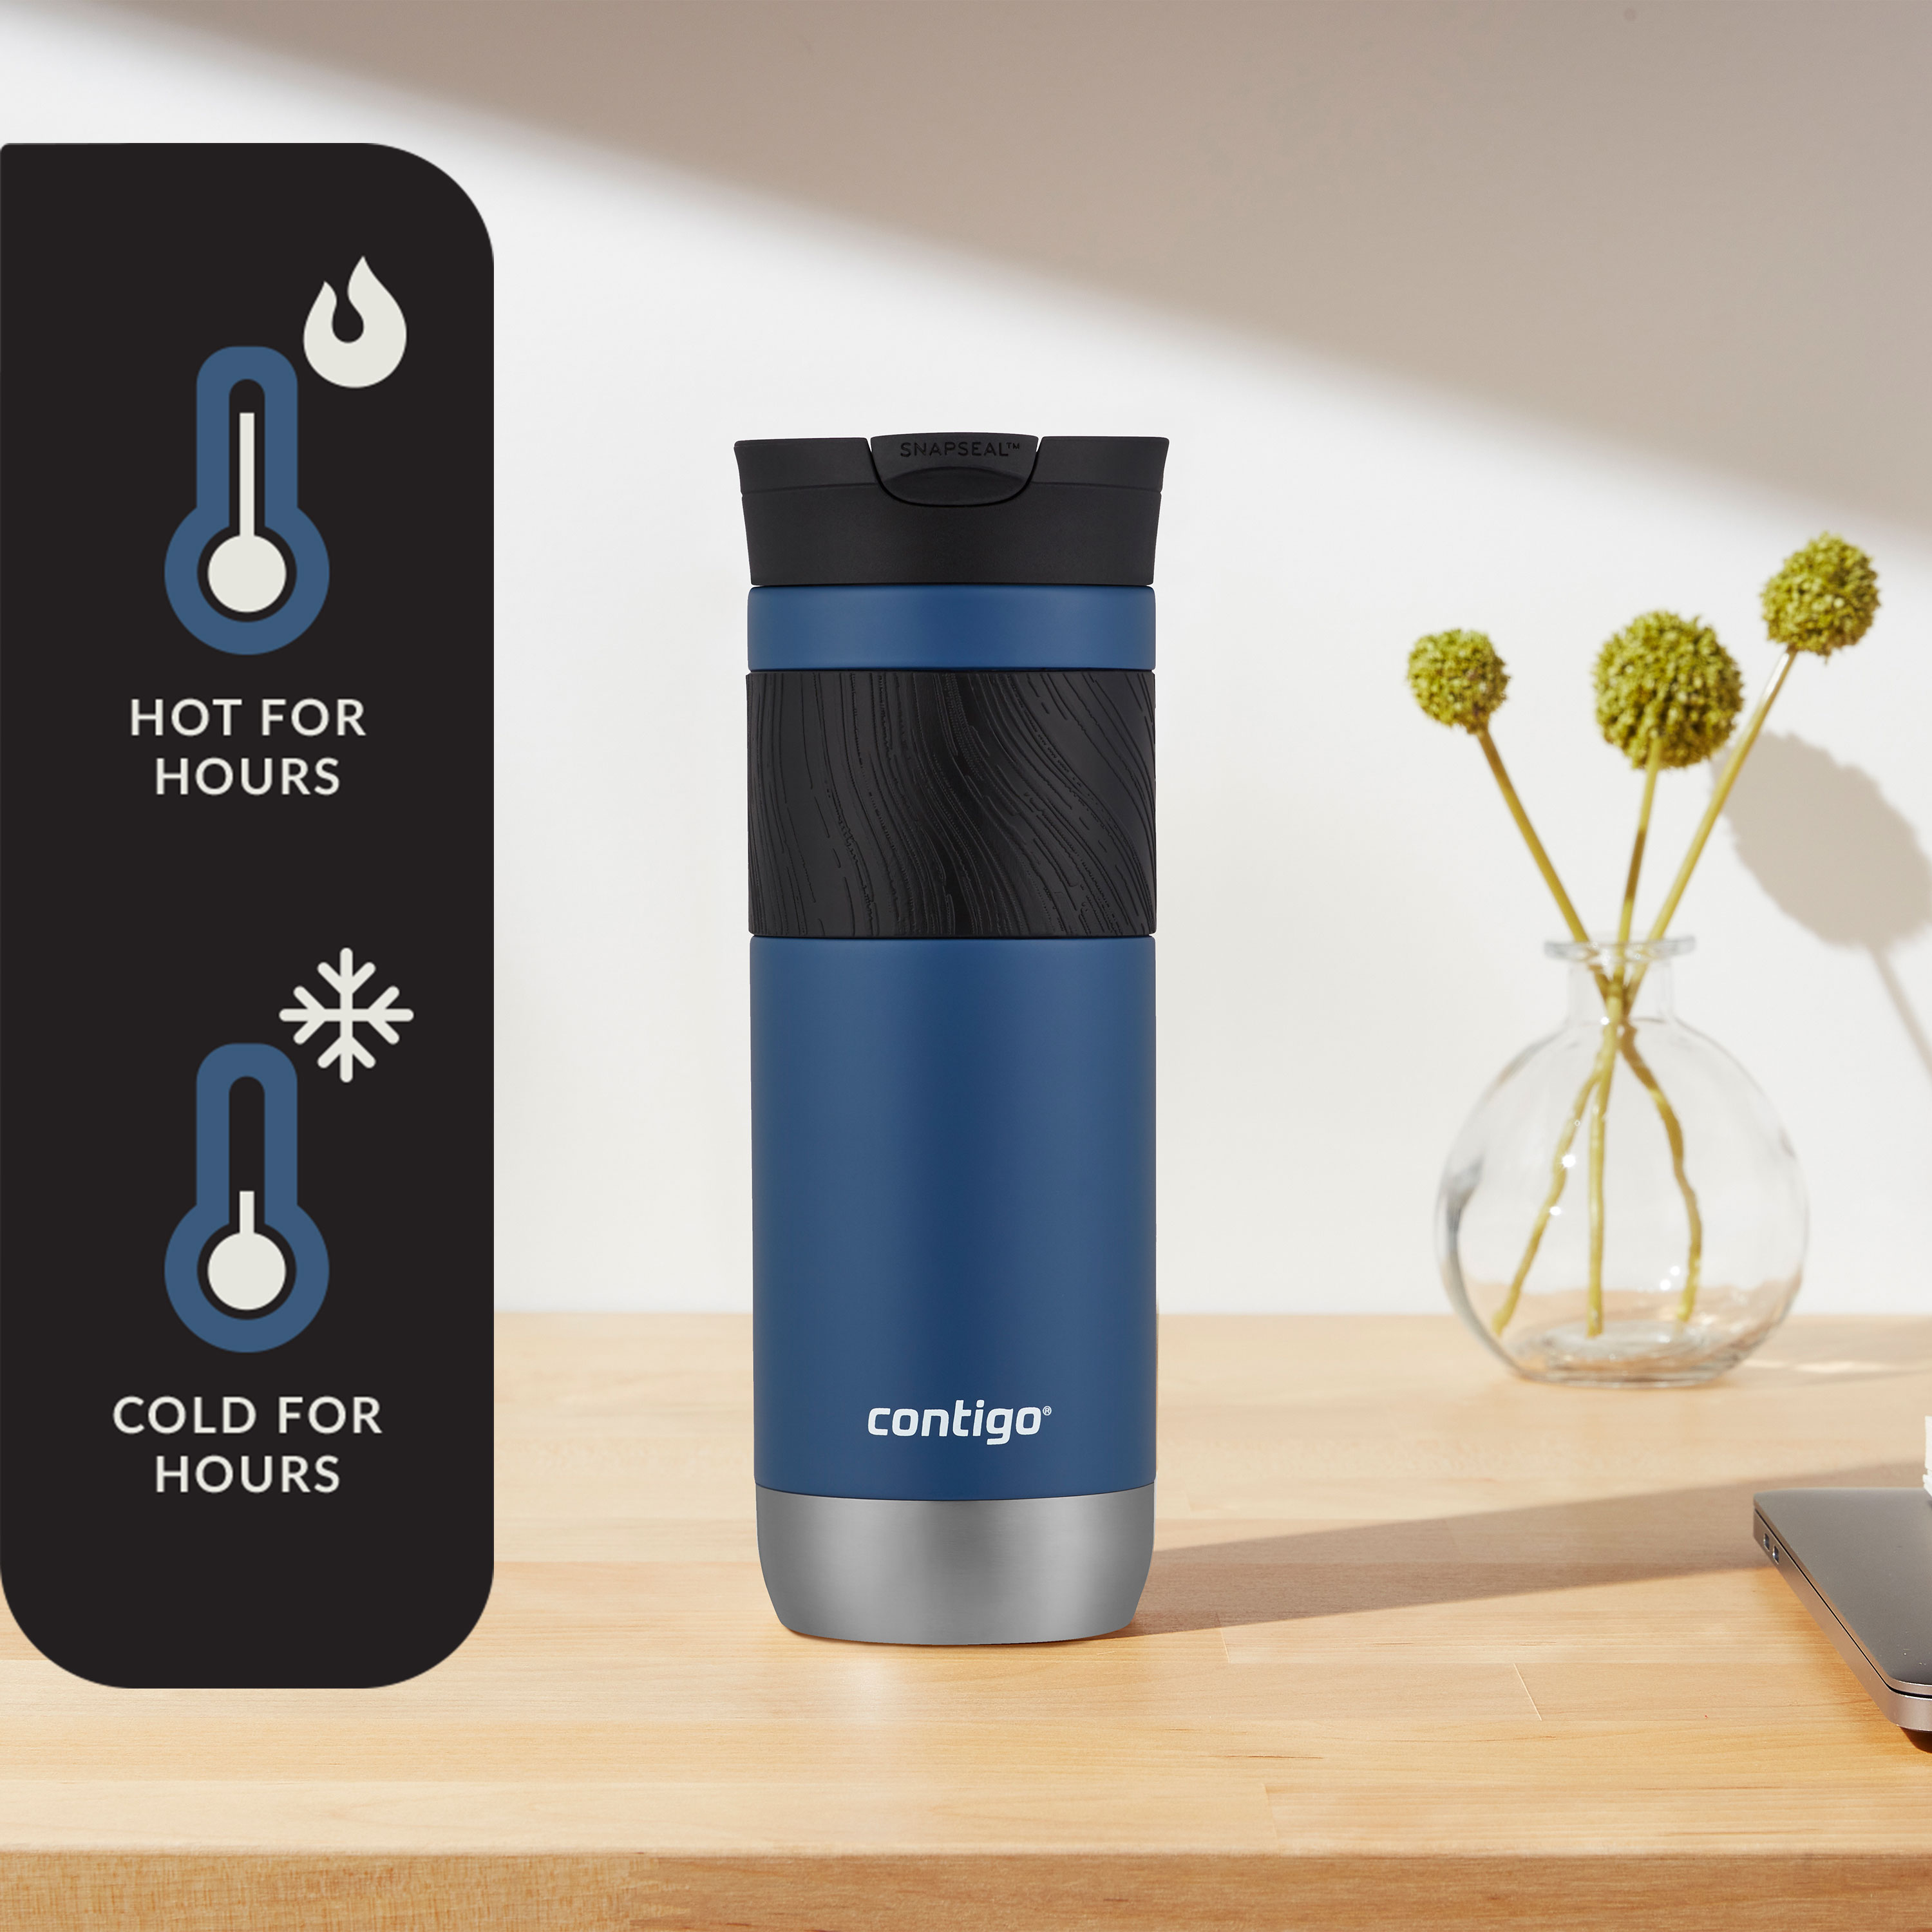 Contigo Byron 2.0 Stainless Steel Travel Mug with SNAPSEAL Lid and Grip Blue Corn, 20 fl oz. - image 3 of 6